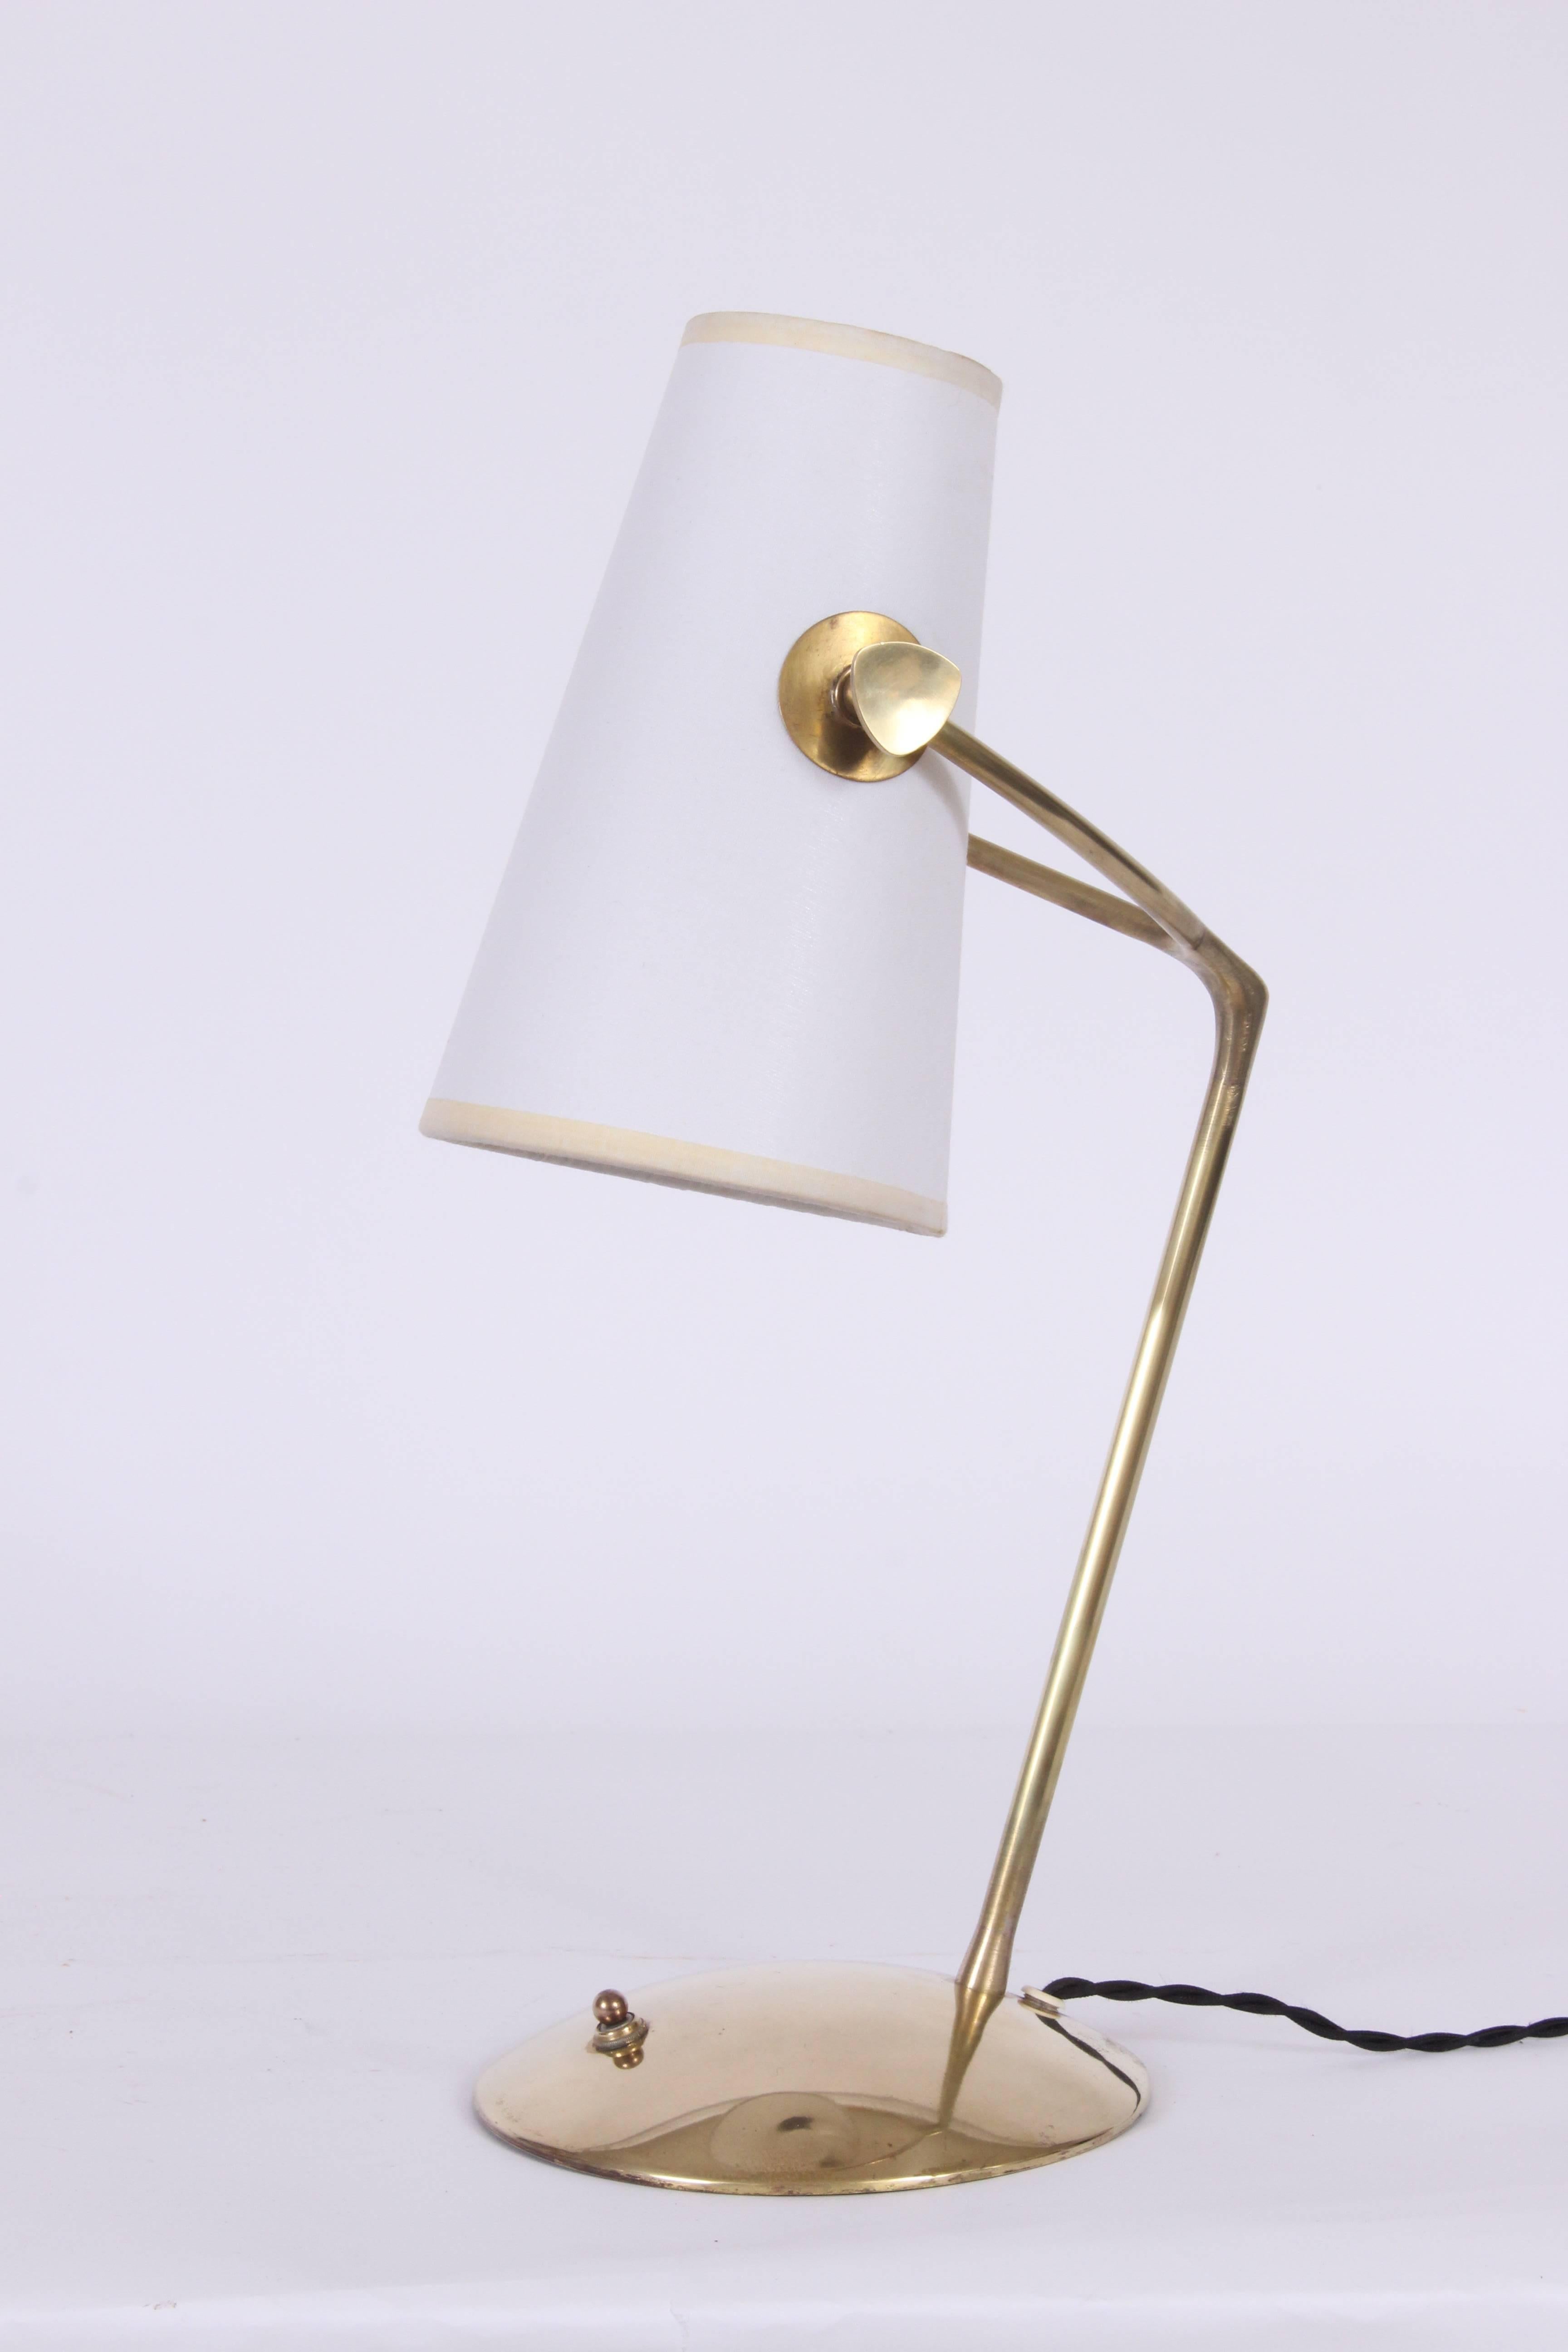 French Modern Boris Lacroix attributed adjustable brass reading table lamp. Finely handcrafted brass wishbone form with brass knobs to adjust the newly replaced white paper shade on rounded base. With base switch. Measures: (Shade 8H x 3D top and 5D